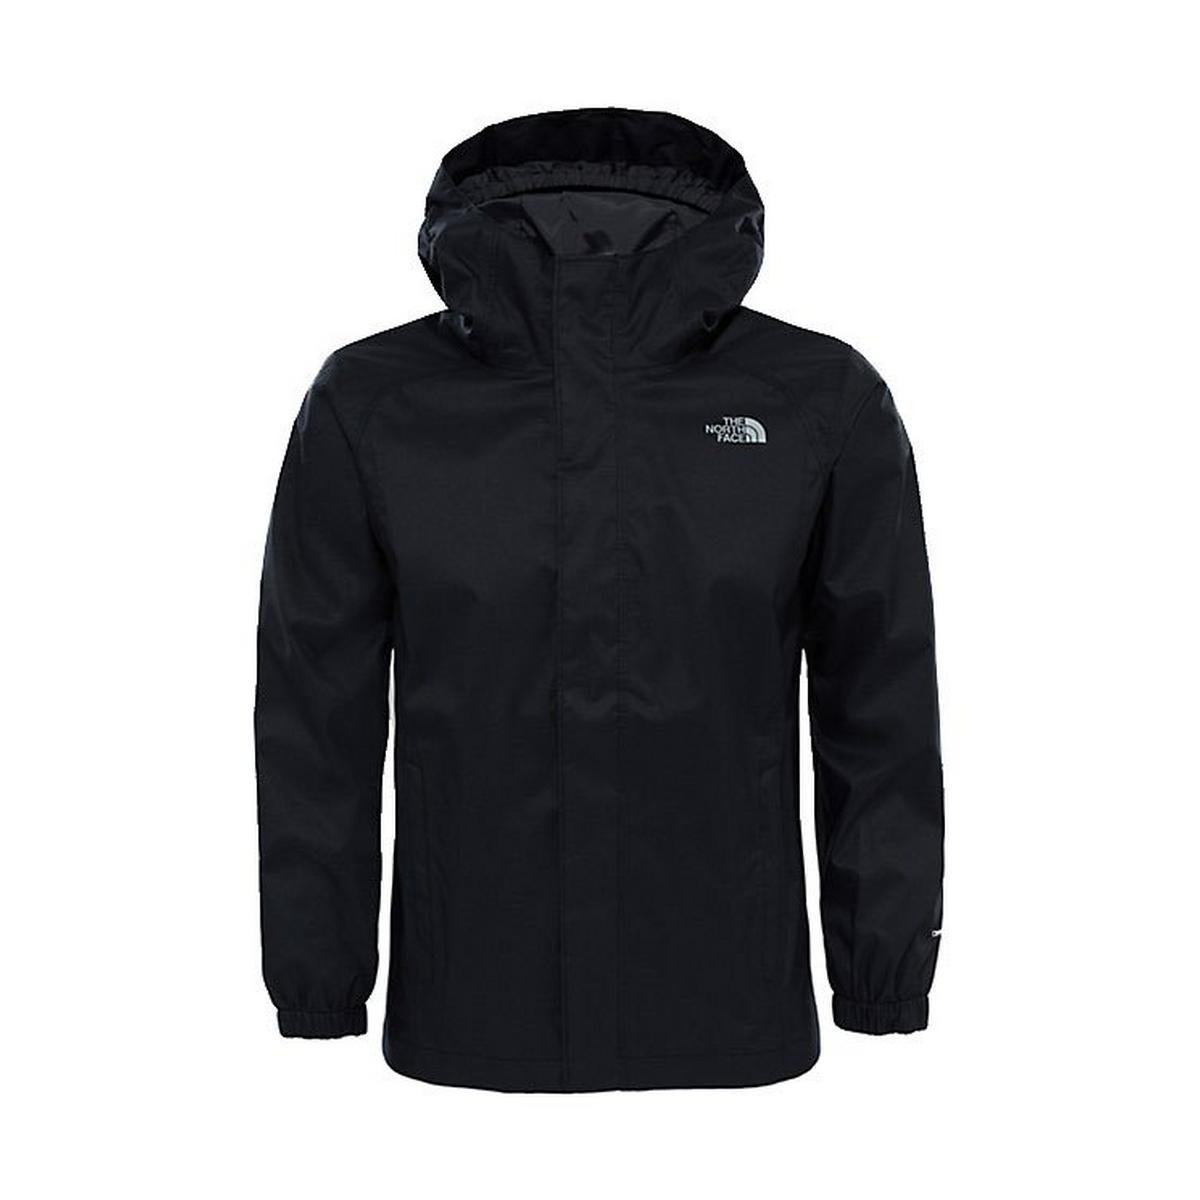 The North Face Kid's Boy's Resolve Reflective Jacket